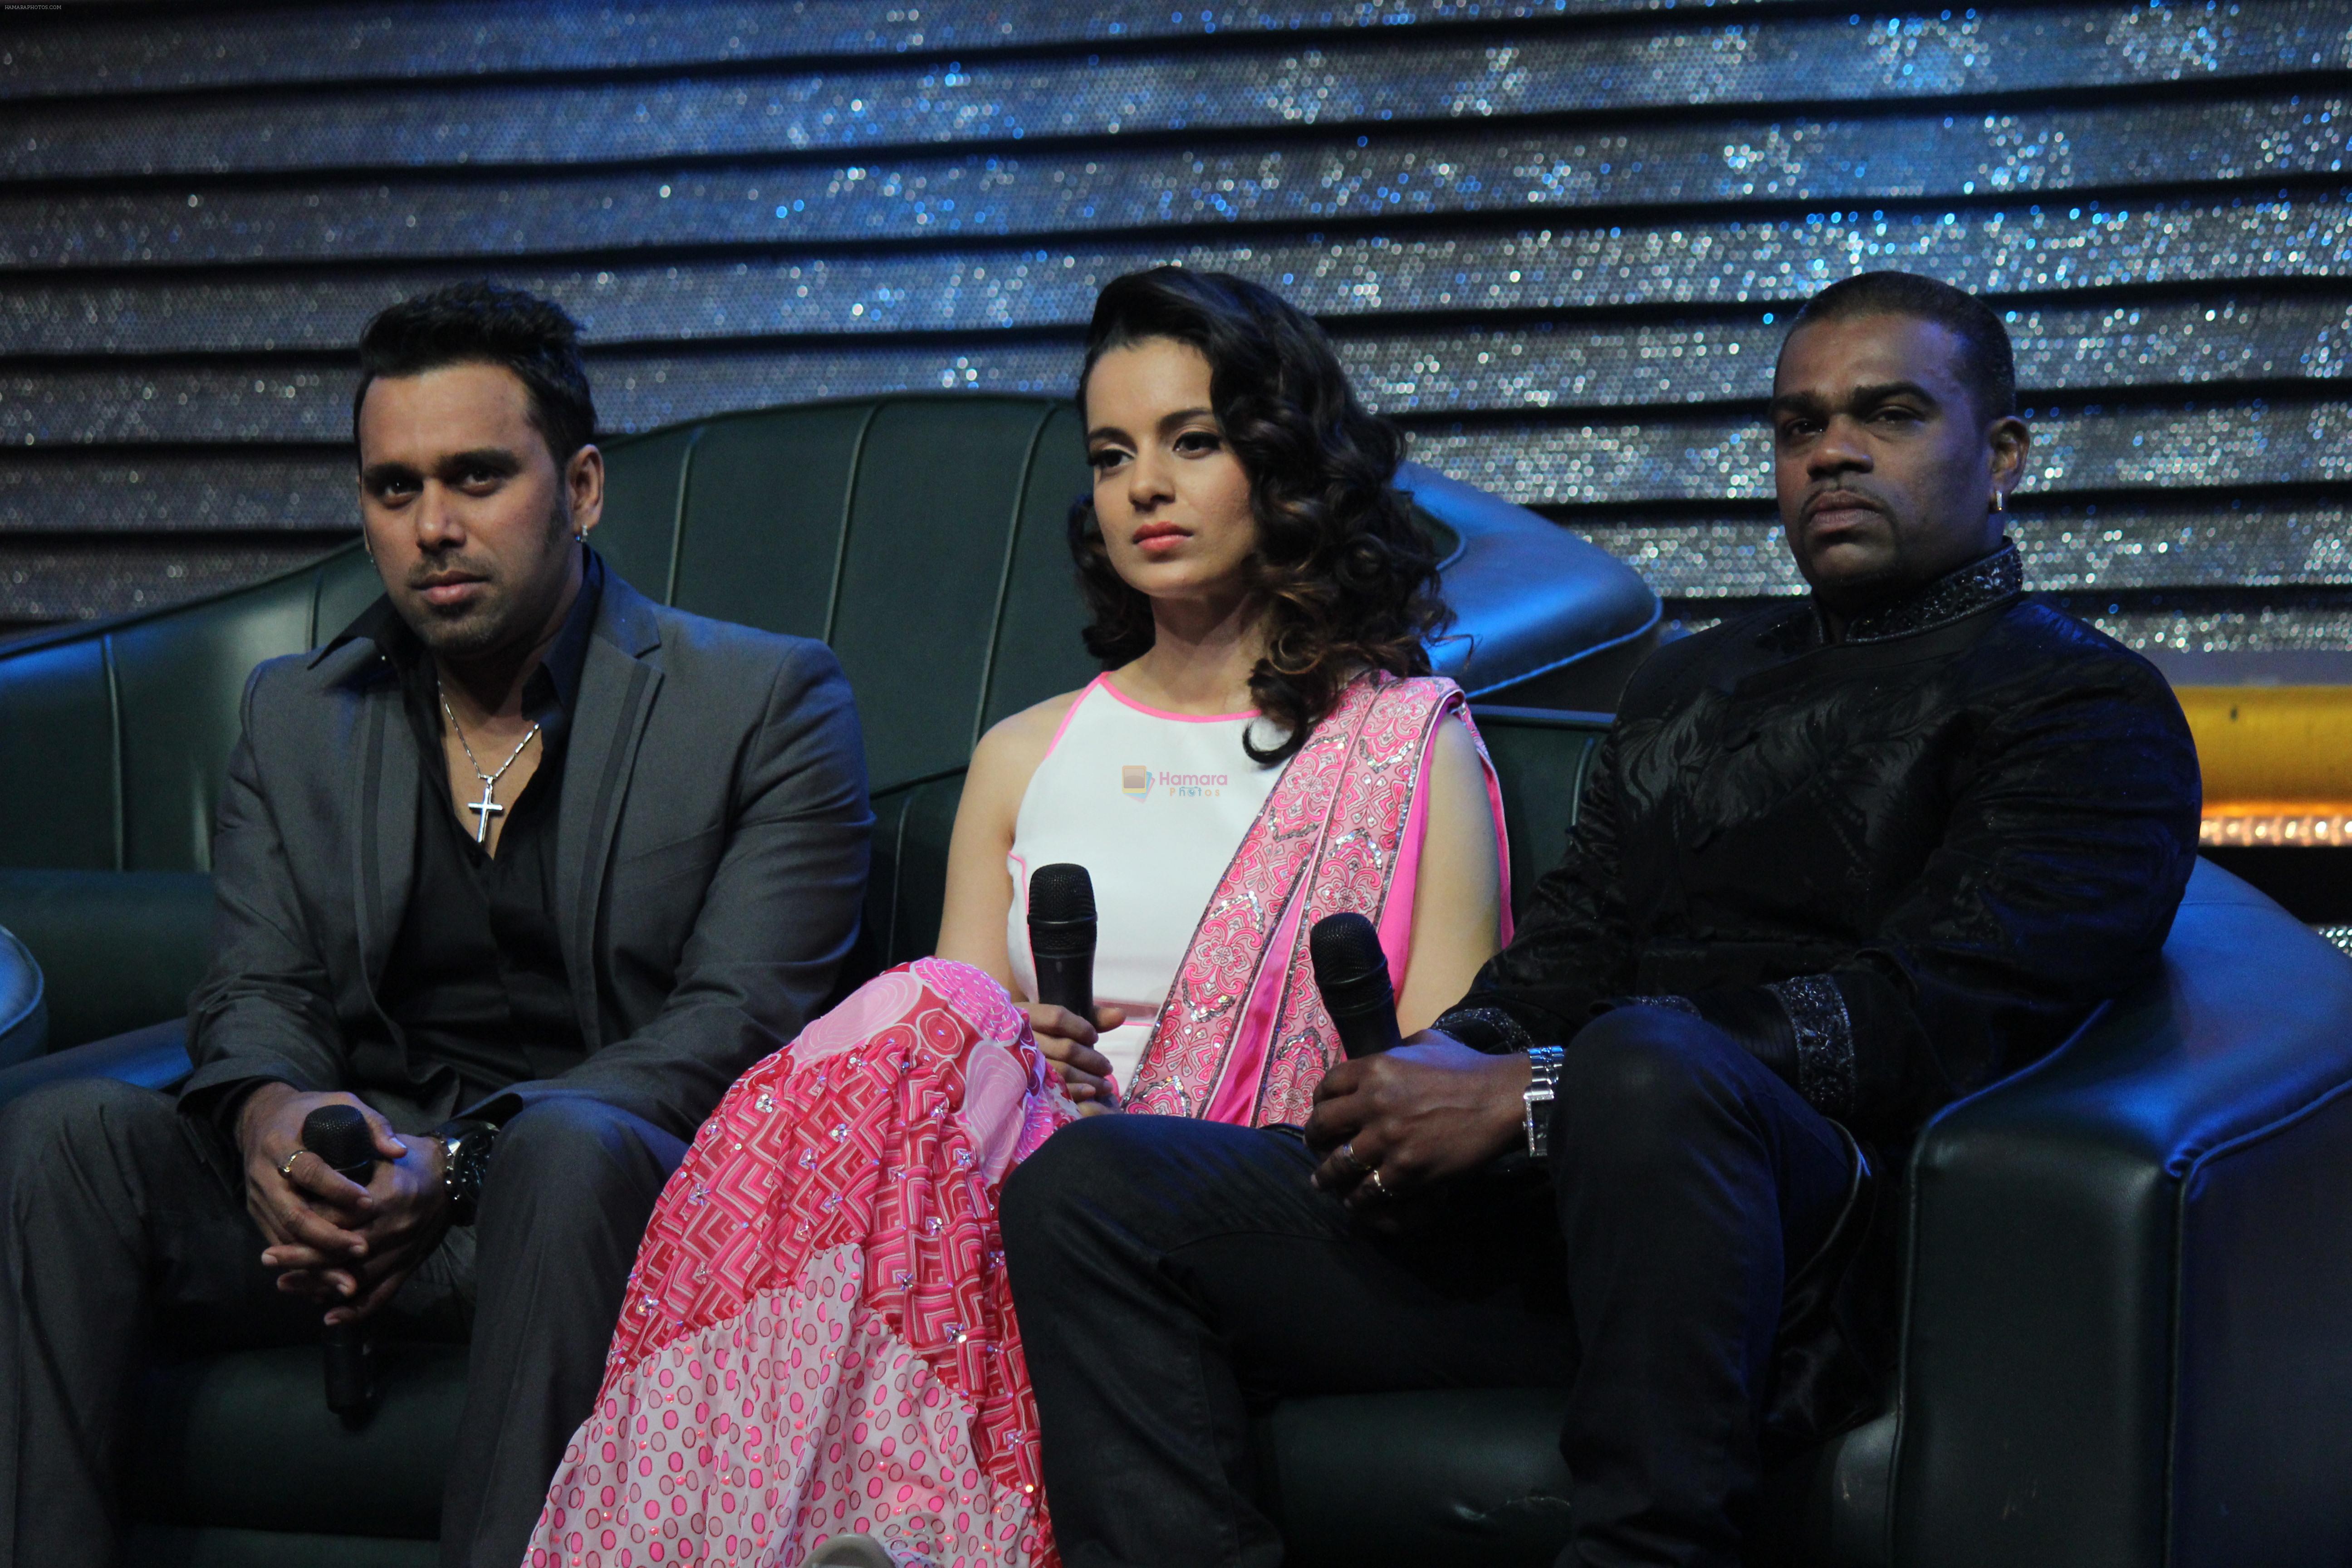 Bosco, Kangana Ranaut and Ceaser on the sets of DID Season 4 for the promotion of the movie Queen